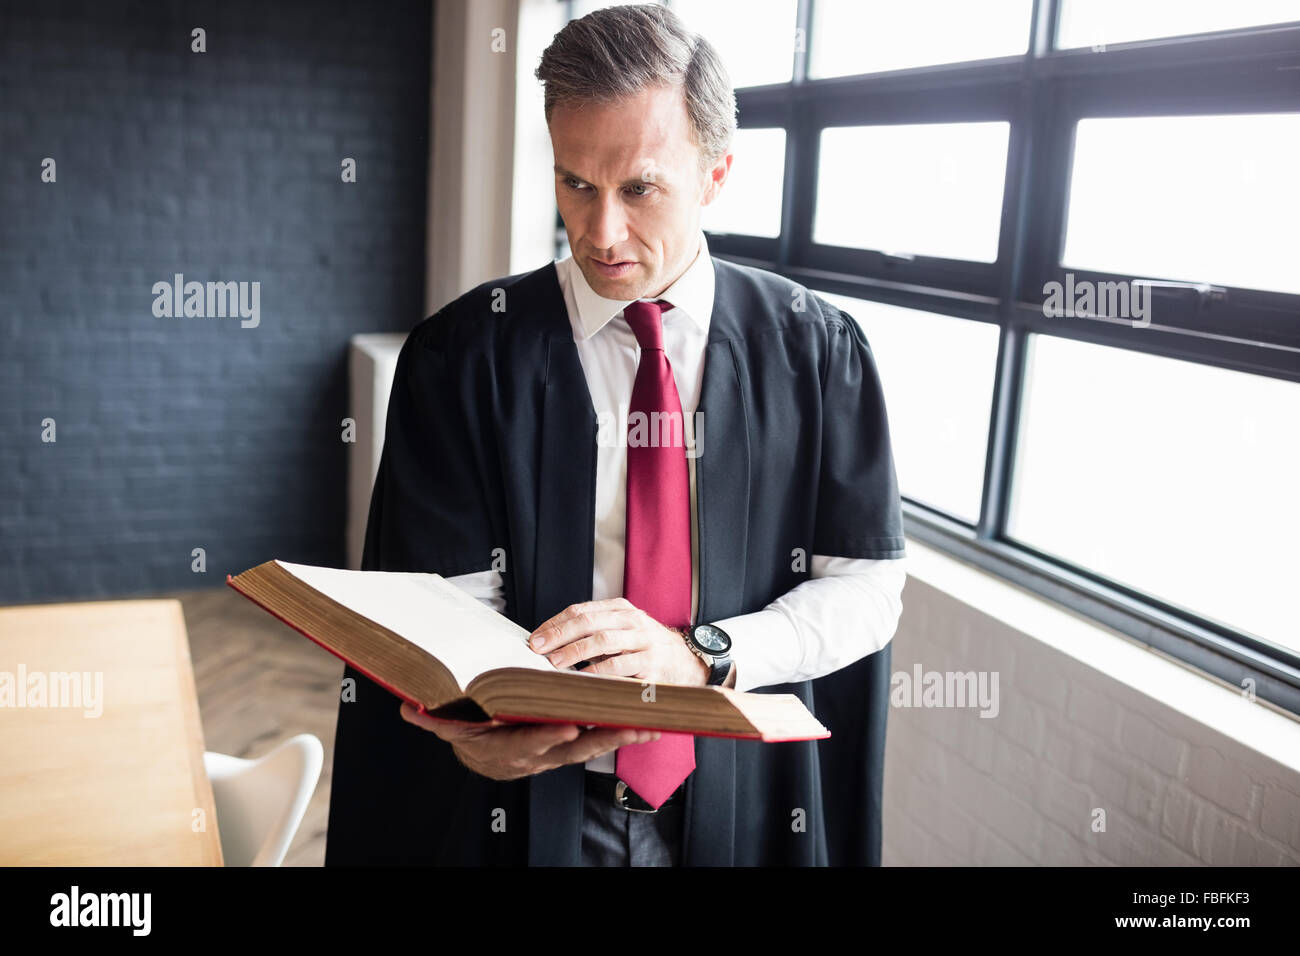 Lawyer reading a book attentively Stock Photo